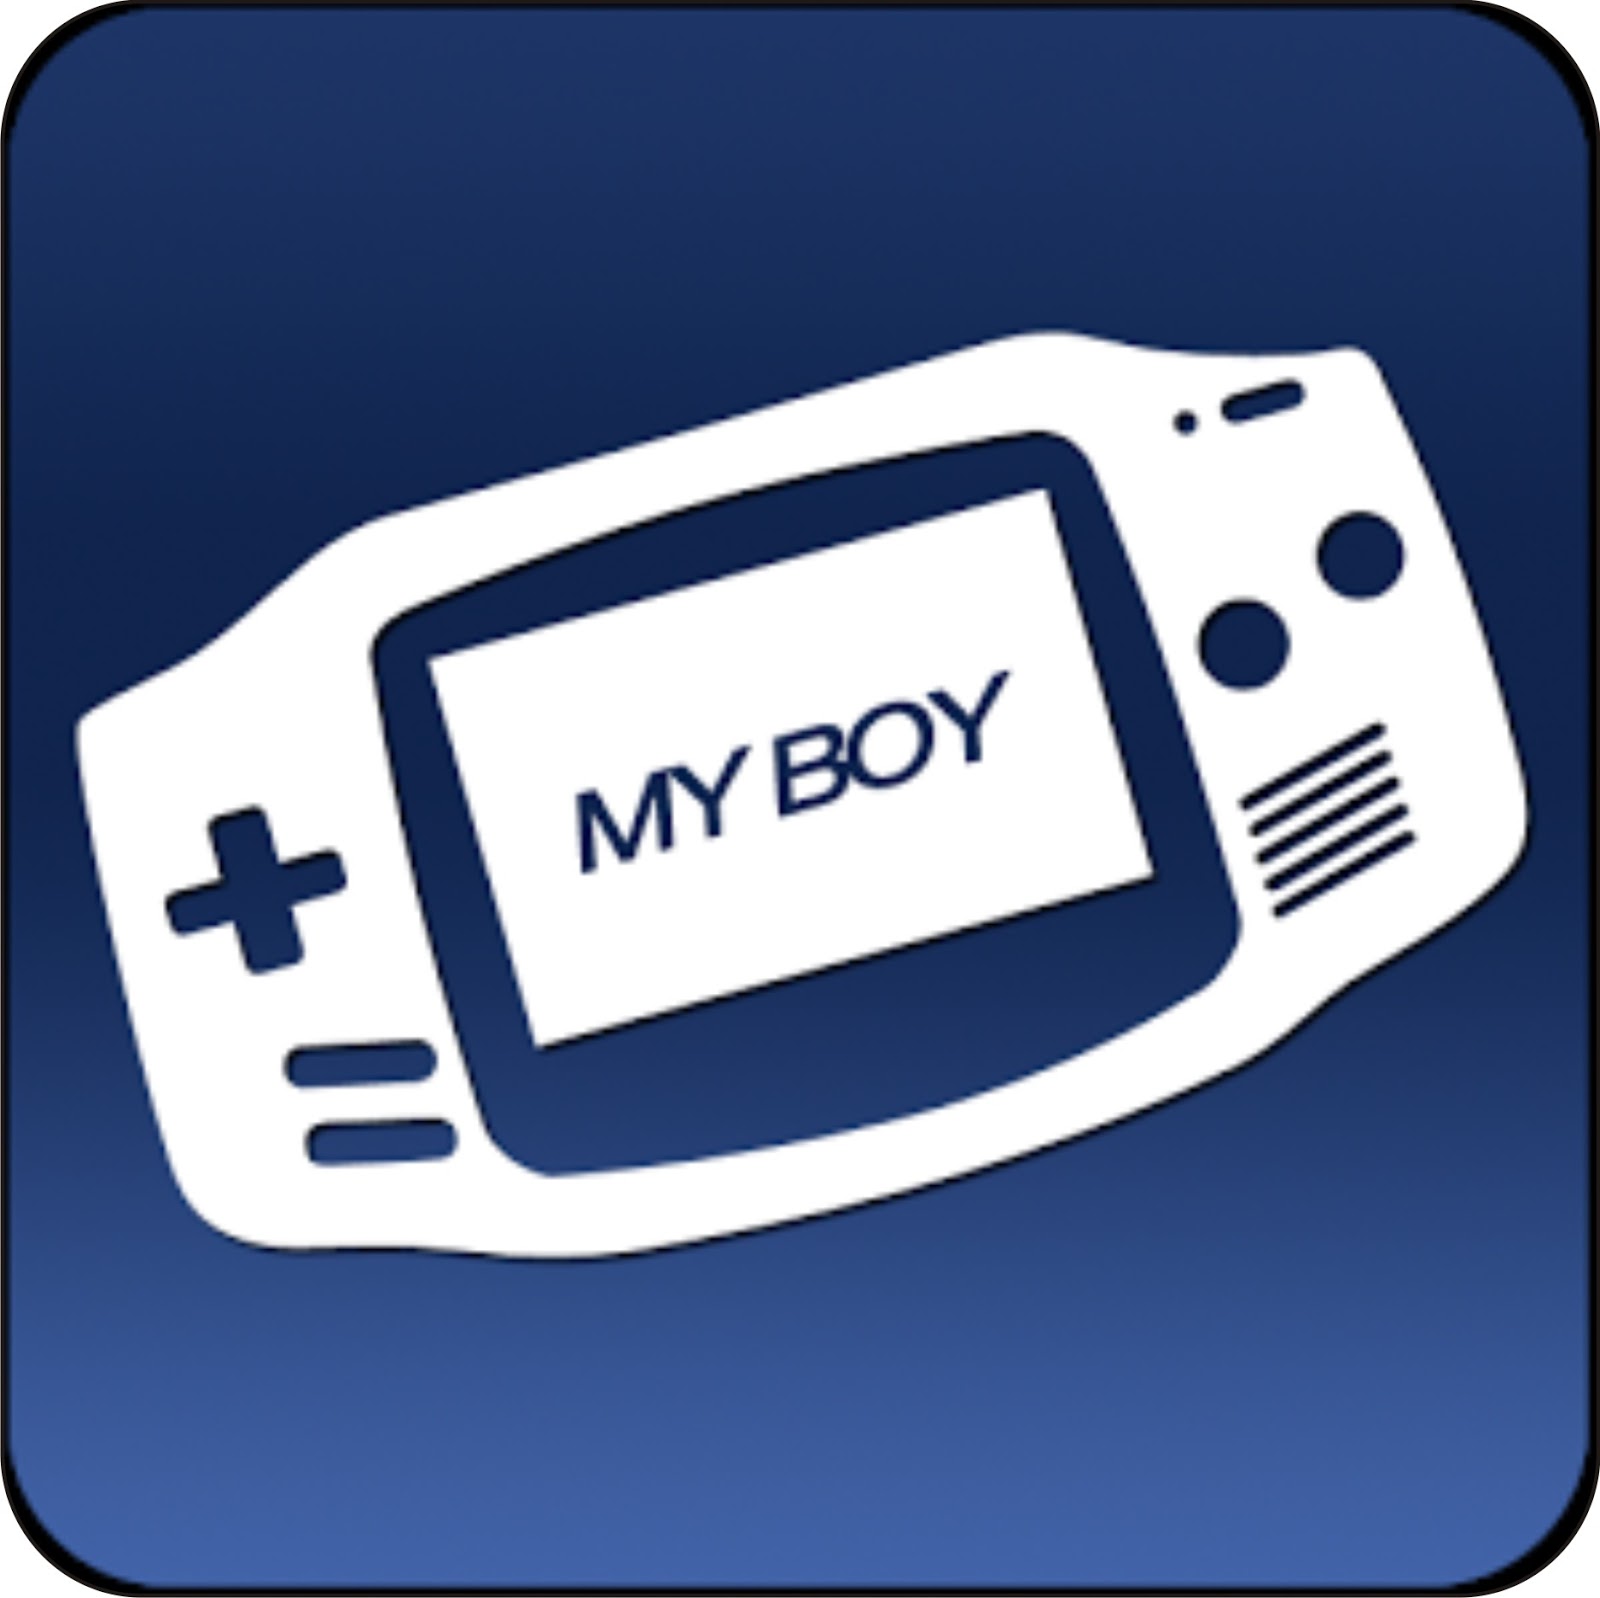 My Boy! - GBA Emulator APK | Android Apps Download